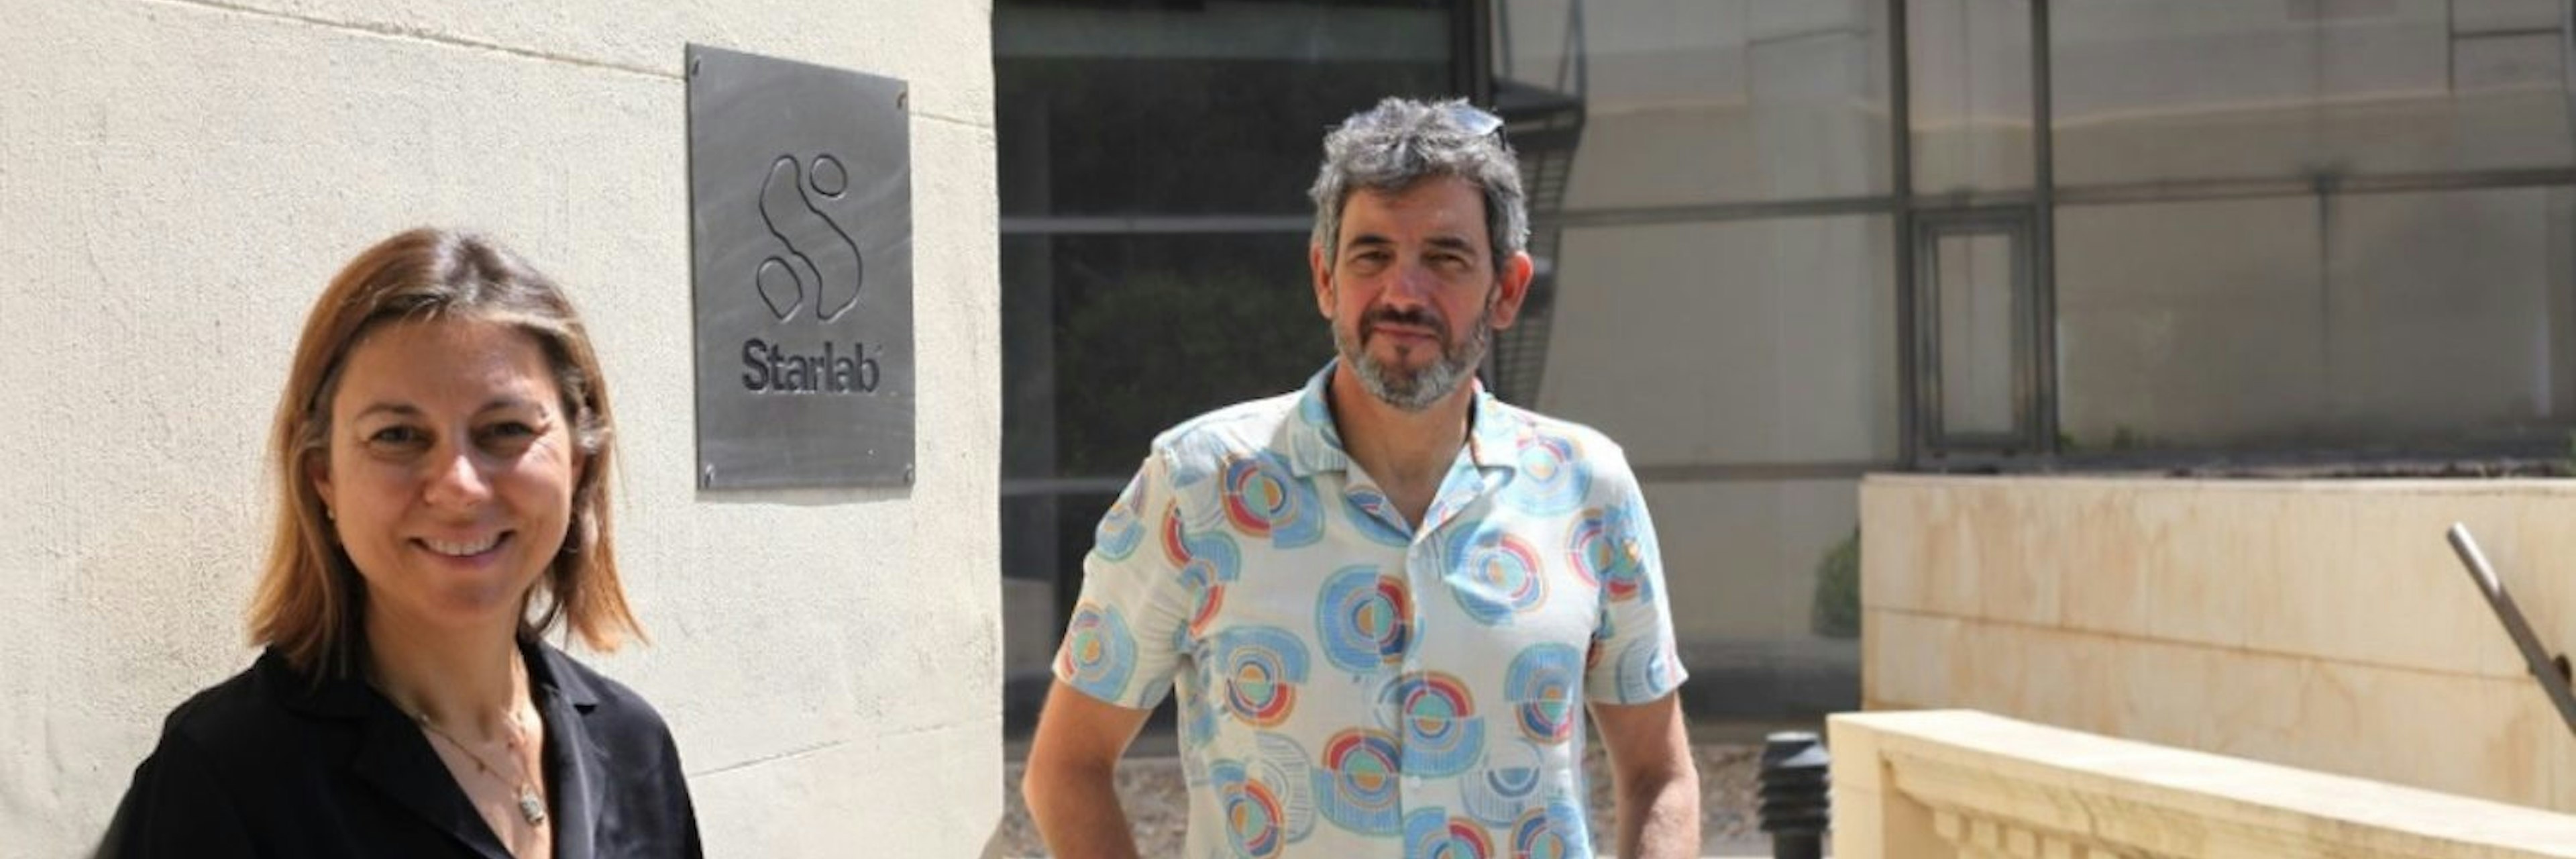 An image of Ana Maiques and Giulio Rufini outside Starlab in Barcelona